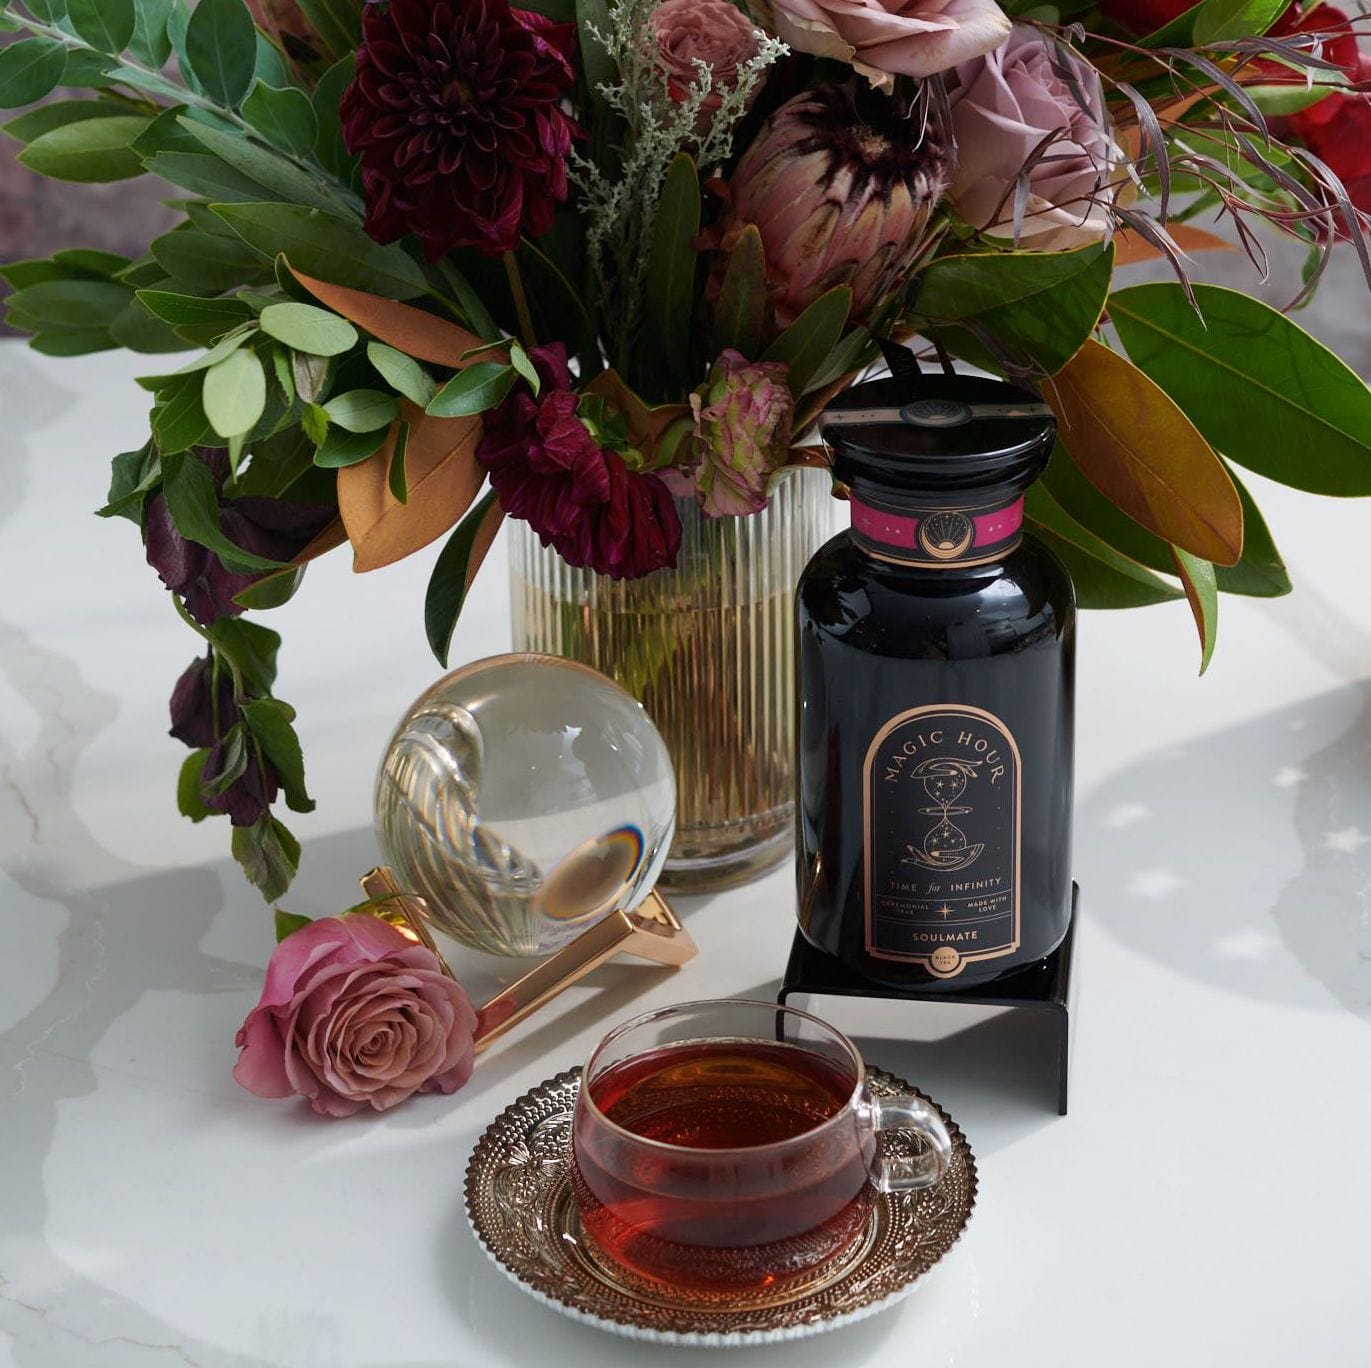 A colorful floral arrangement sits in a vase on a table next to a bottle labeled &quot;Magic Hour&quot; and a teacup filled with Soulmate: Chocolate-Raspberry-Rose Black Tea for Finding &amp; Celebrating Love by Magic Hour. A glass orb and a single pink rose are also on the table, creating an elegant and inviting scene.